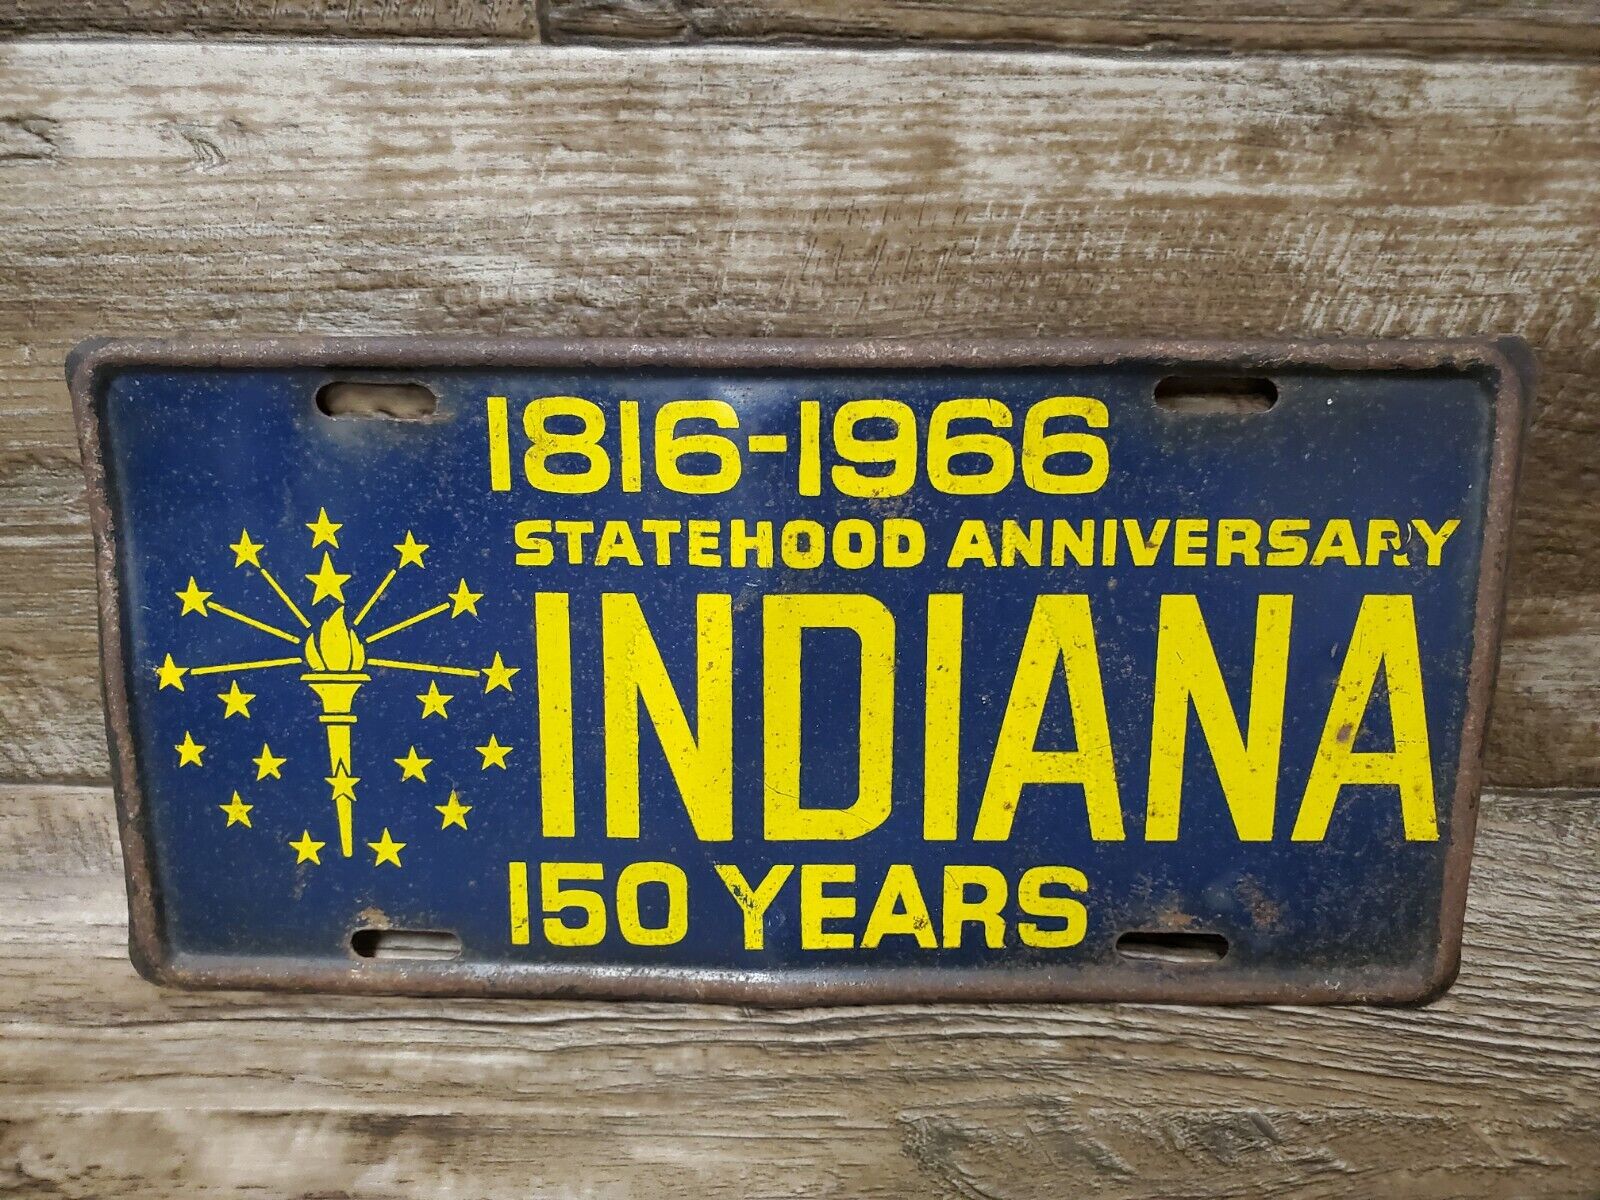 VINTAGE INDIANA 1816-1966 STATEHOOD ANNIVERSARY 150 YEARS BOOSTER LICENSE PLATE